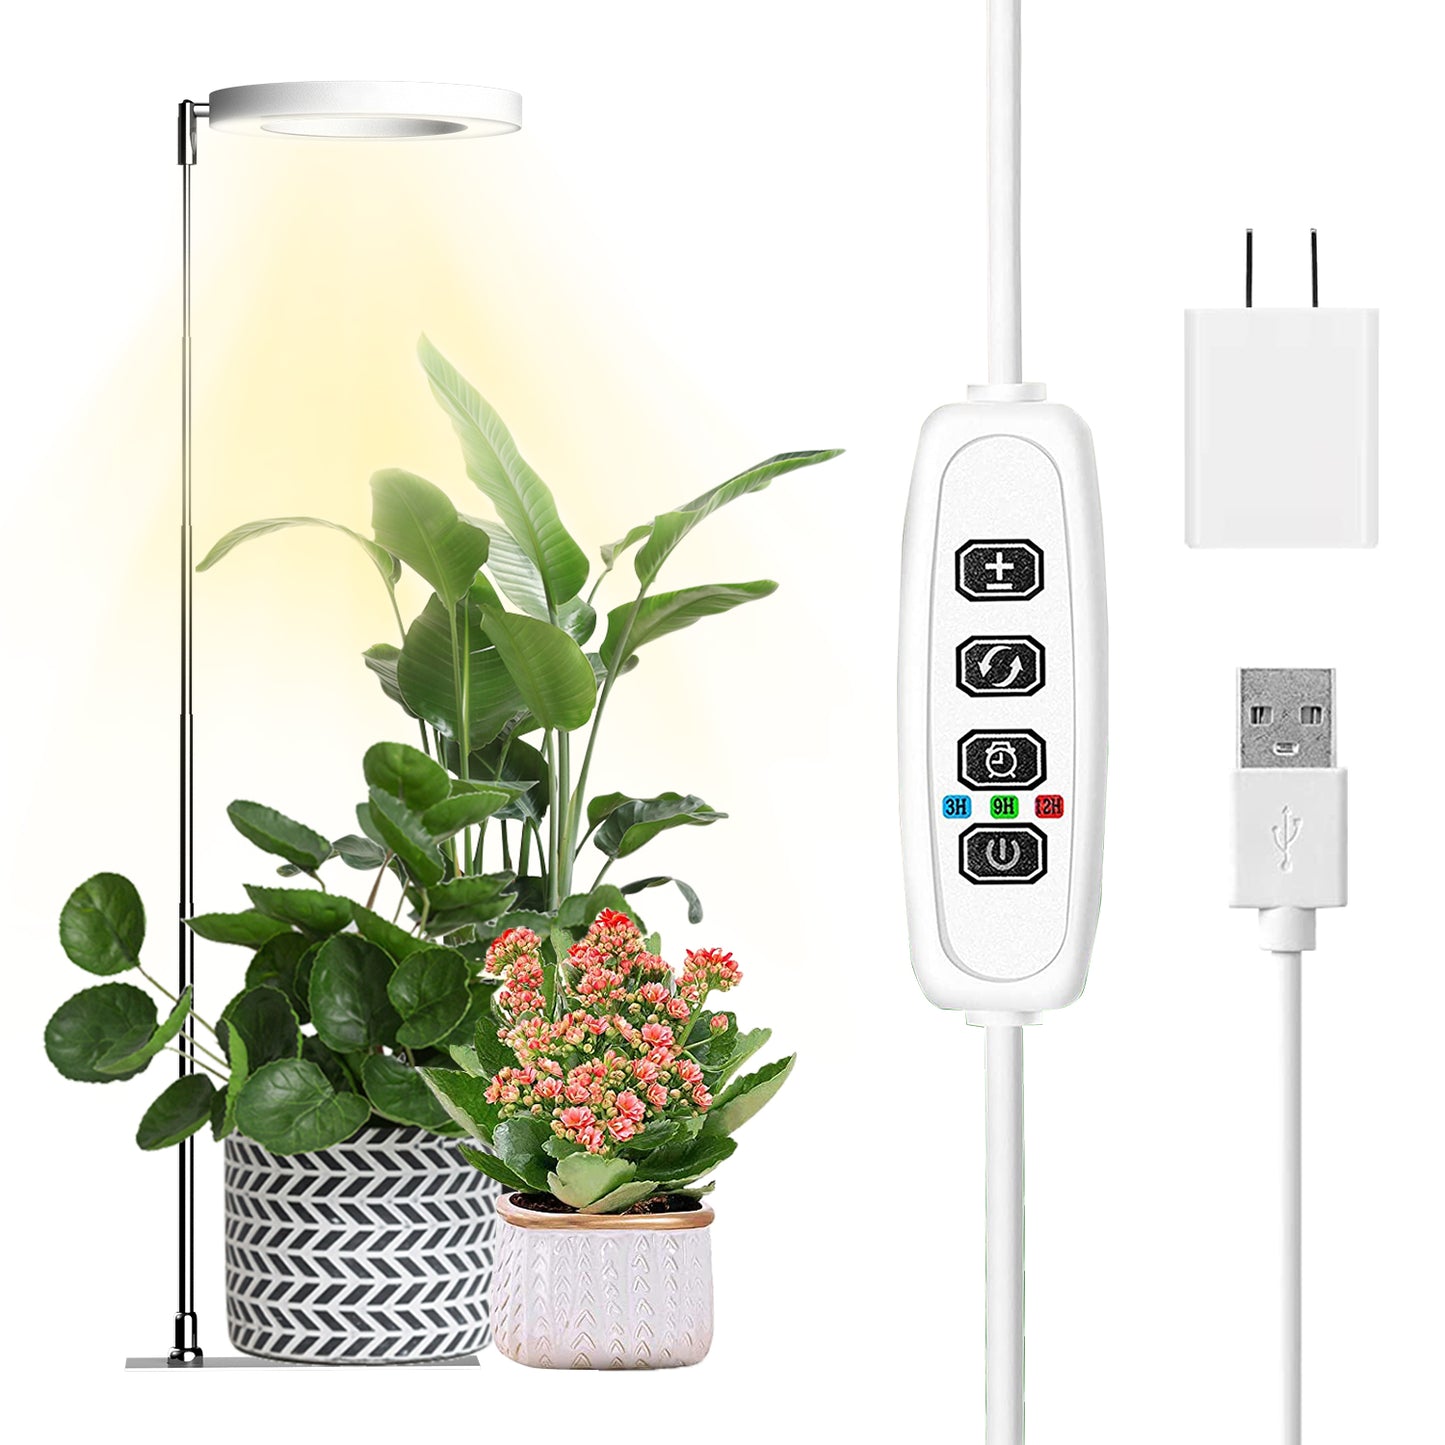 IMVSINCERE Full Spectrum LED Grow Light for Indoor Plants - Adjustable Height Growing Lamp with Stable Base, Auto On/Off Timer (4/9/12H), 10 Dimmable Brightness Levels - Perfect for Small Plants